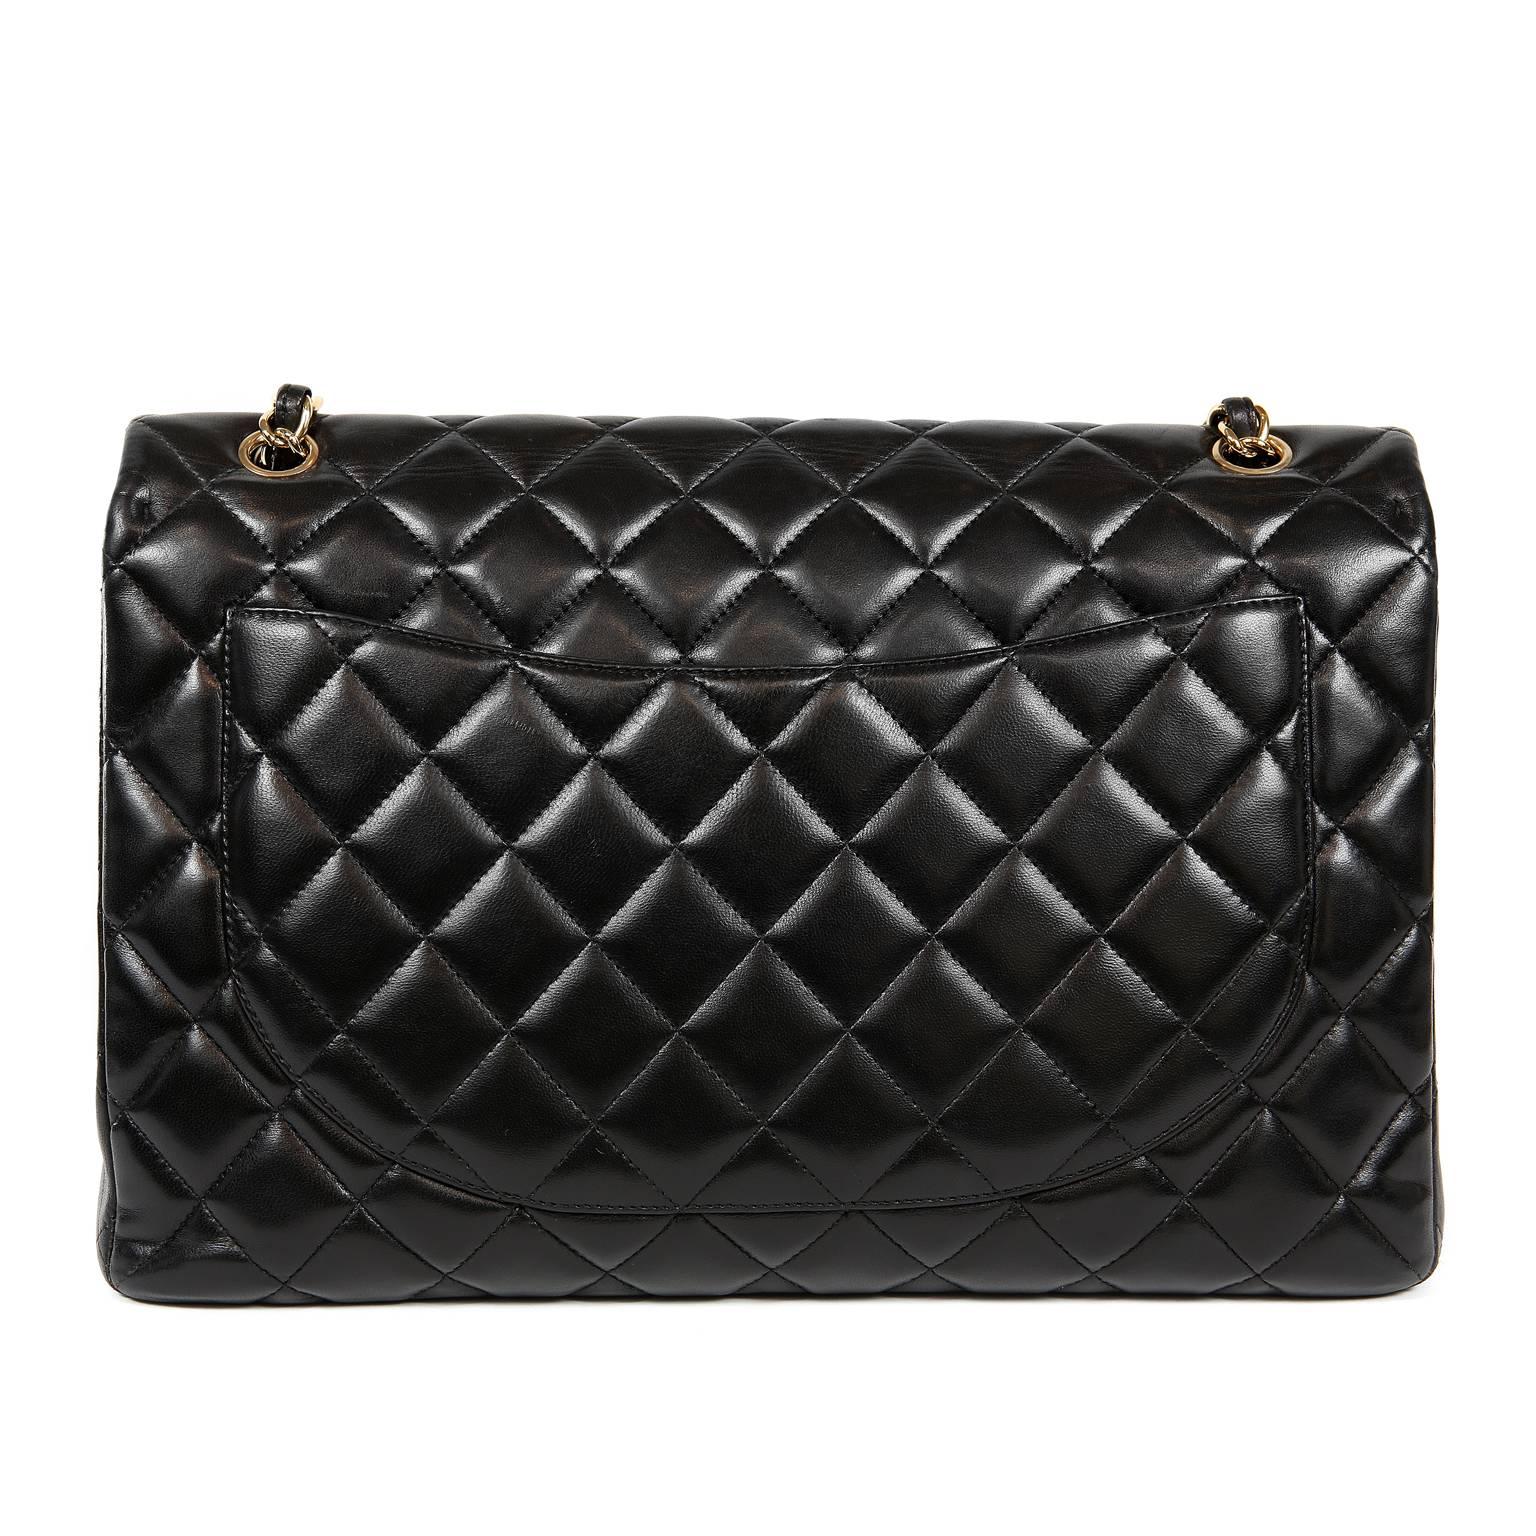 Chanel Black Lambskin Classic Maxi Single Flap Bag- Pristine Condition
Possibly the most coveted silhouette of all the Classics, the Single Flap Maxi with gold hardware is a must have staple for any collector.  
Black lambskin is quilted in